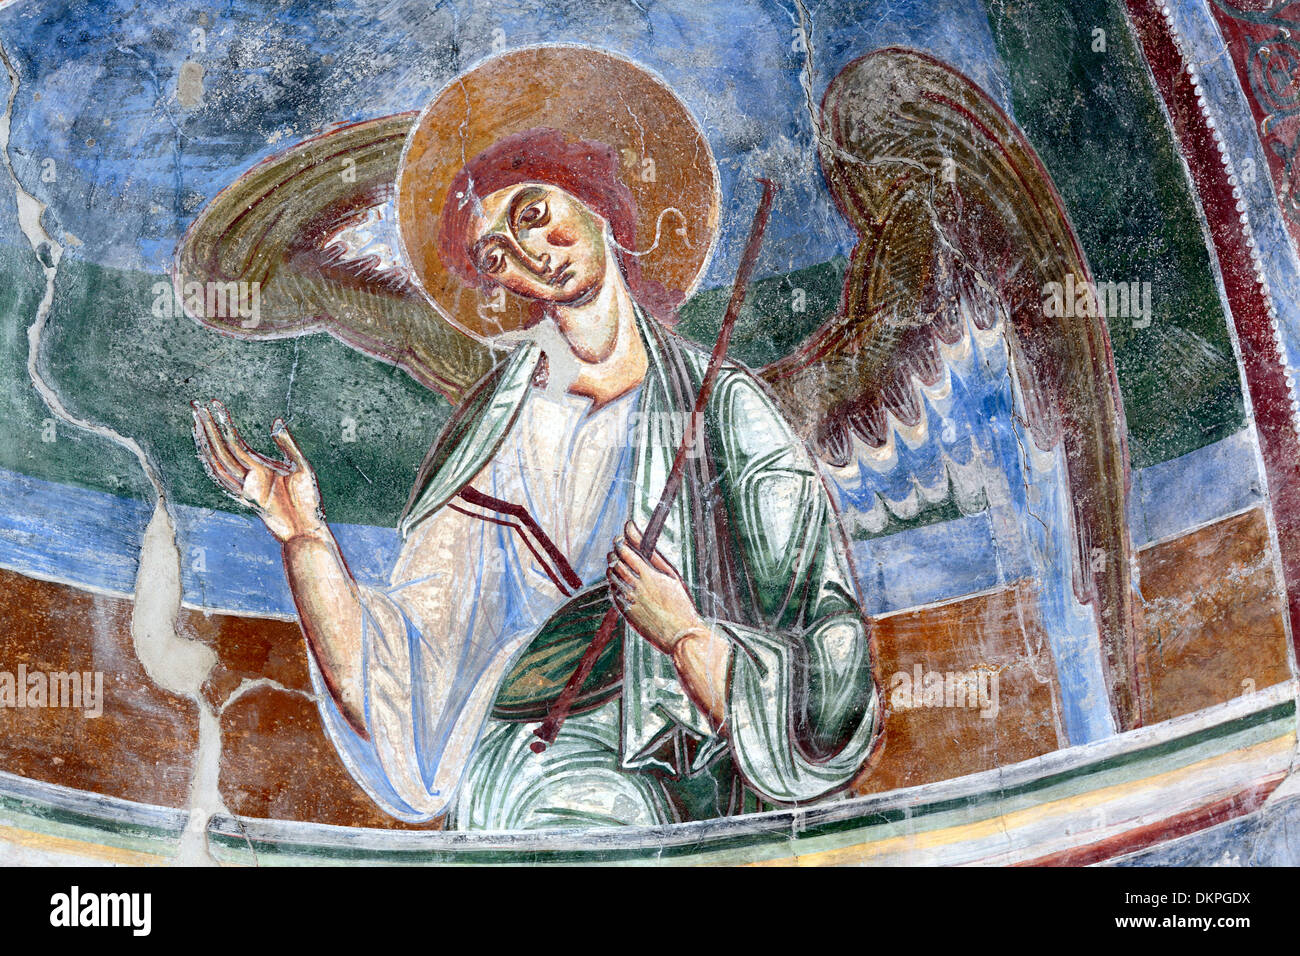 Mural painting, abbey church, Sant Angelo in Formis, Campania, Italy Stock Photo